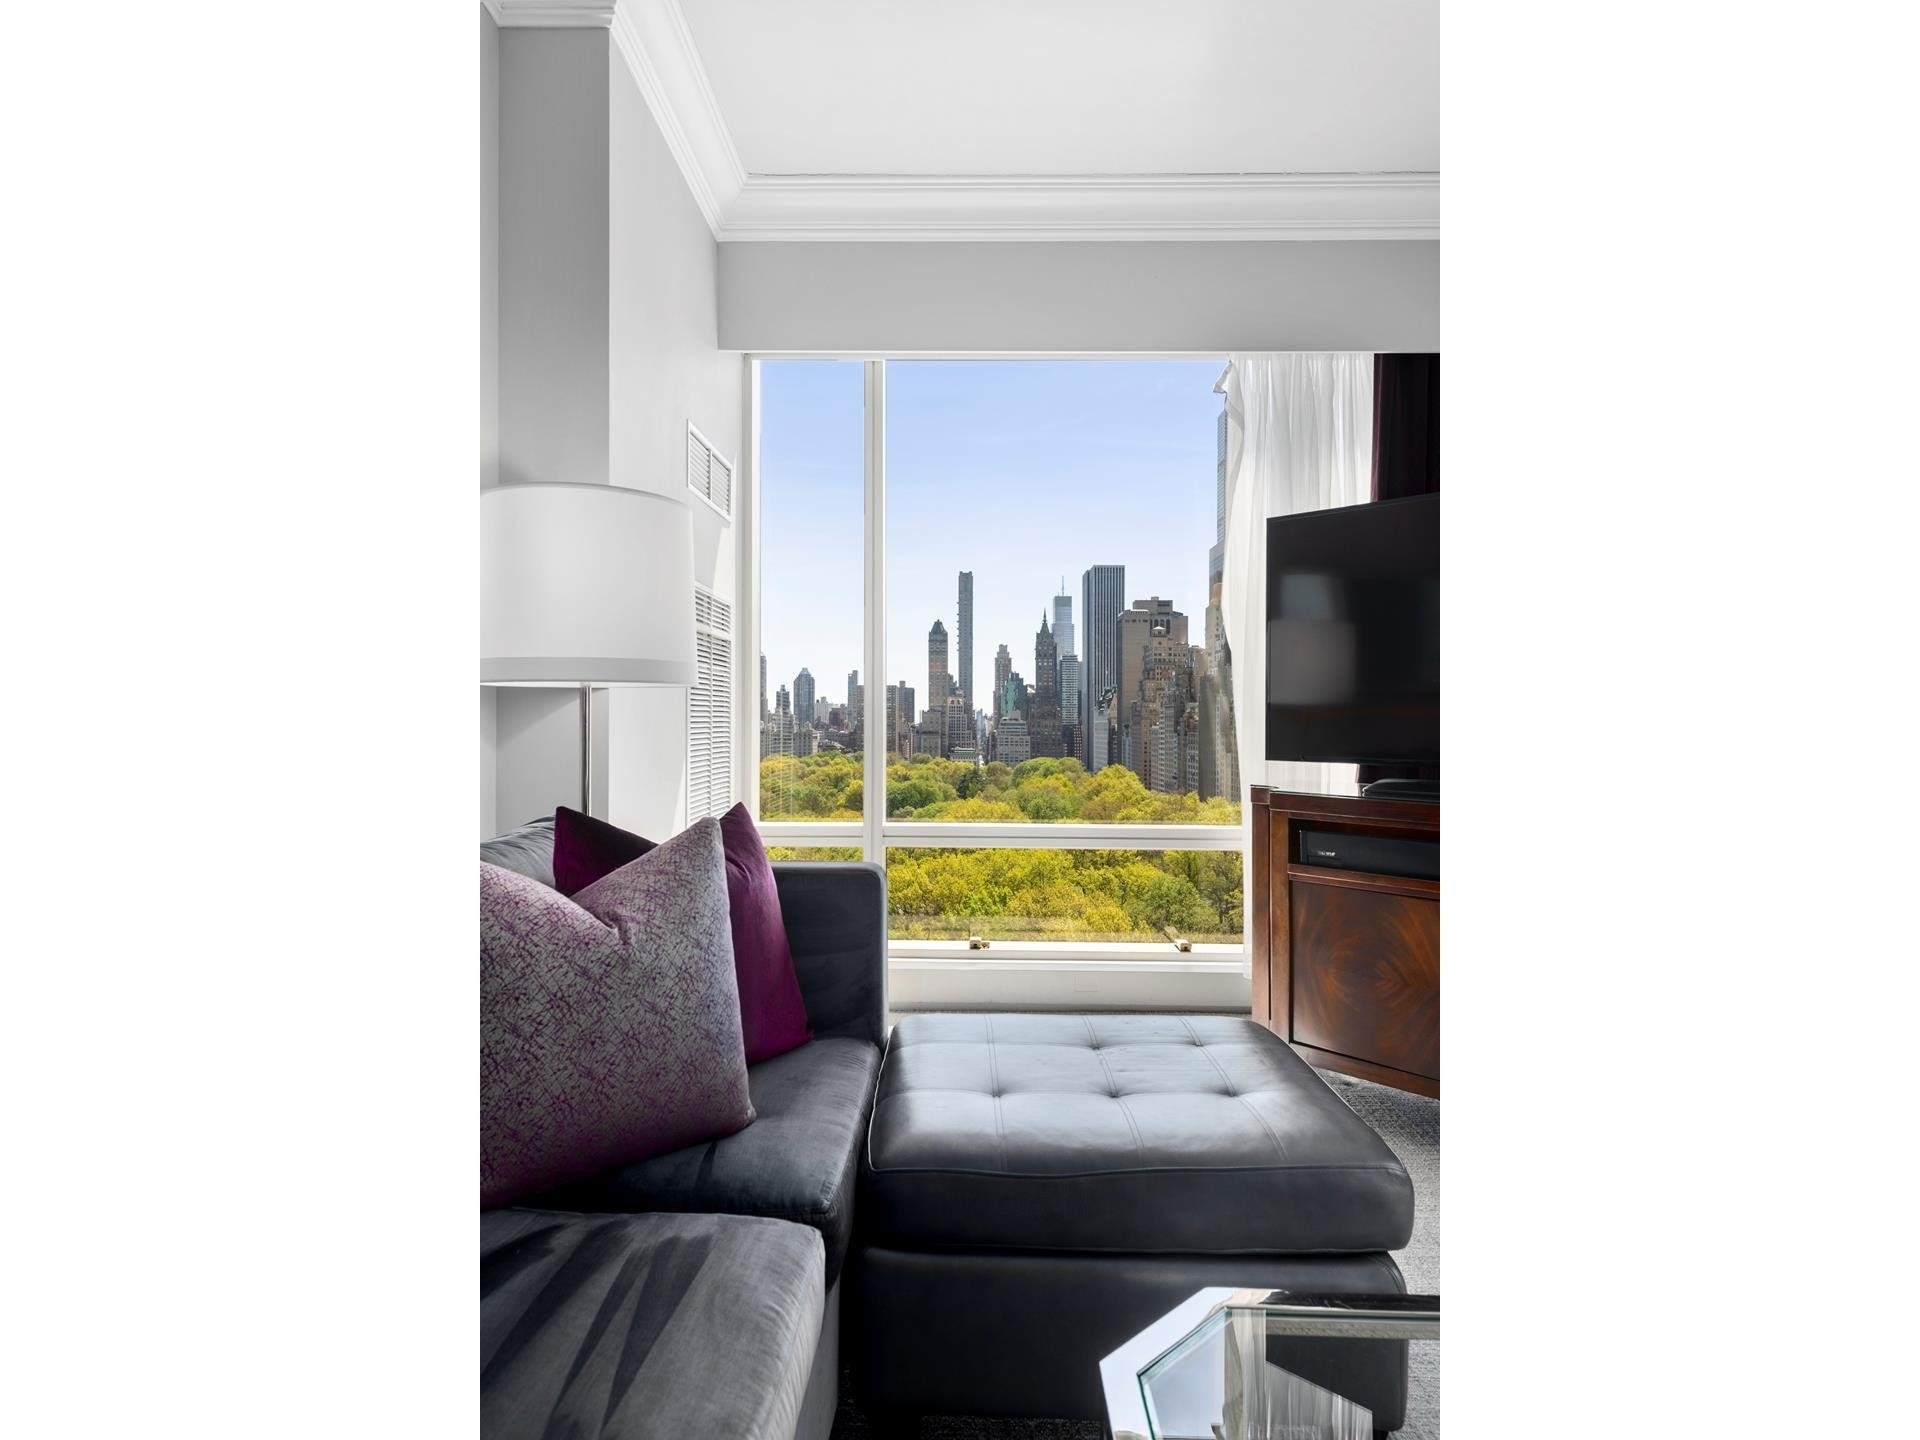 Condominium at One Central Park West, 1 CENTRAL PARK W, 1210 Lincoln Square, New York